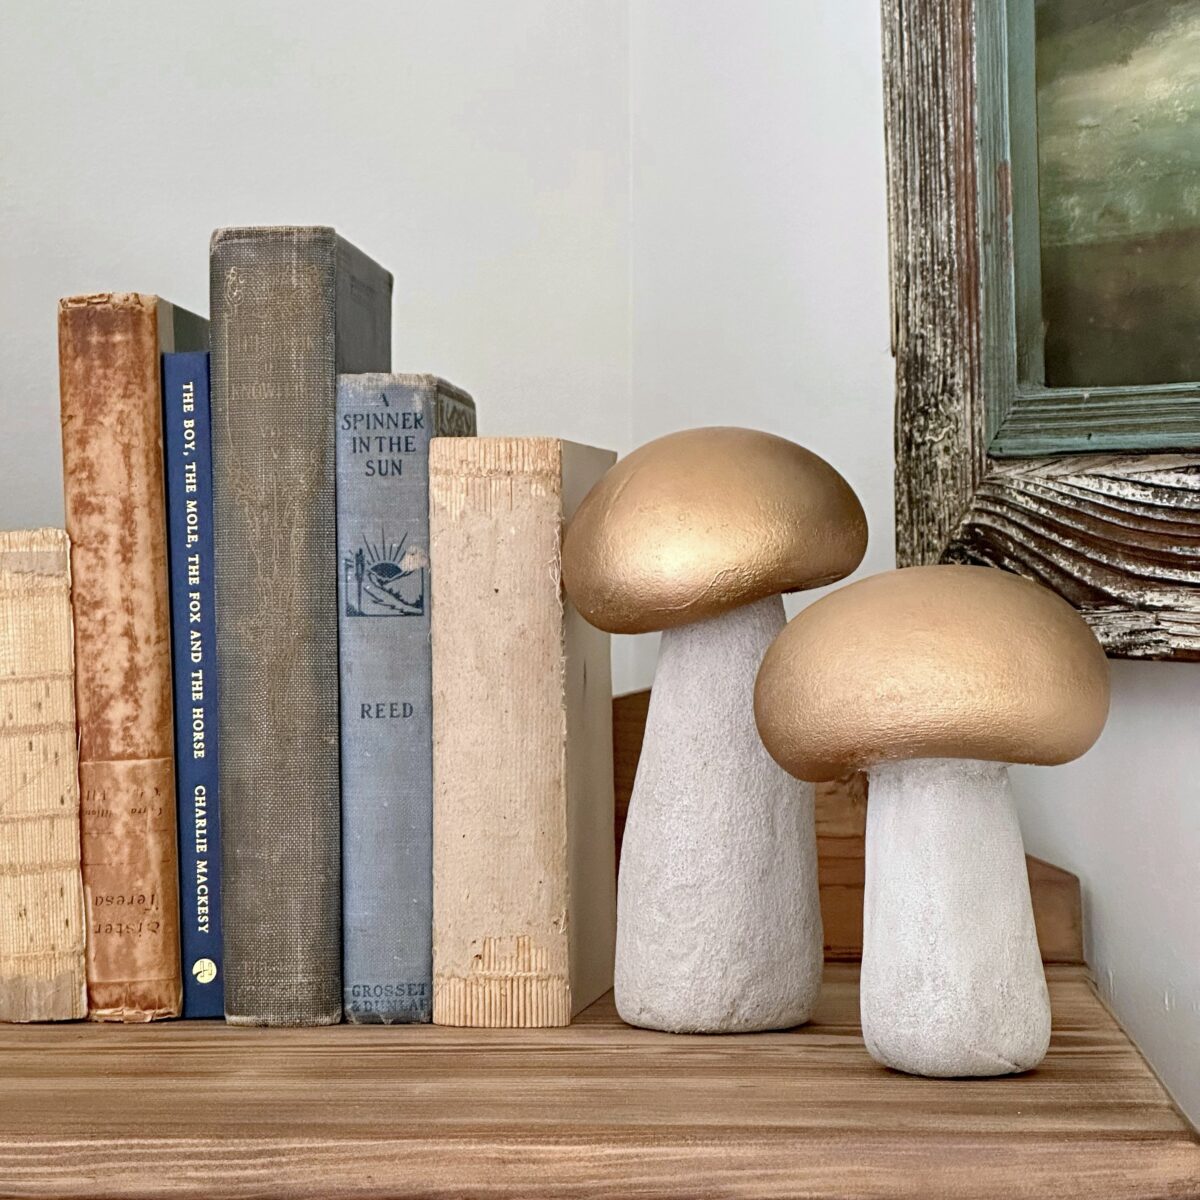 Concrete mushrooms being used as bookends.